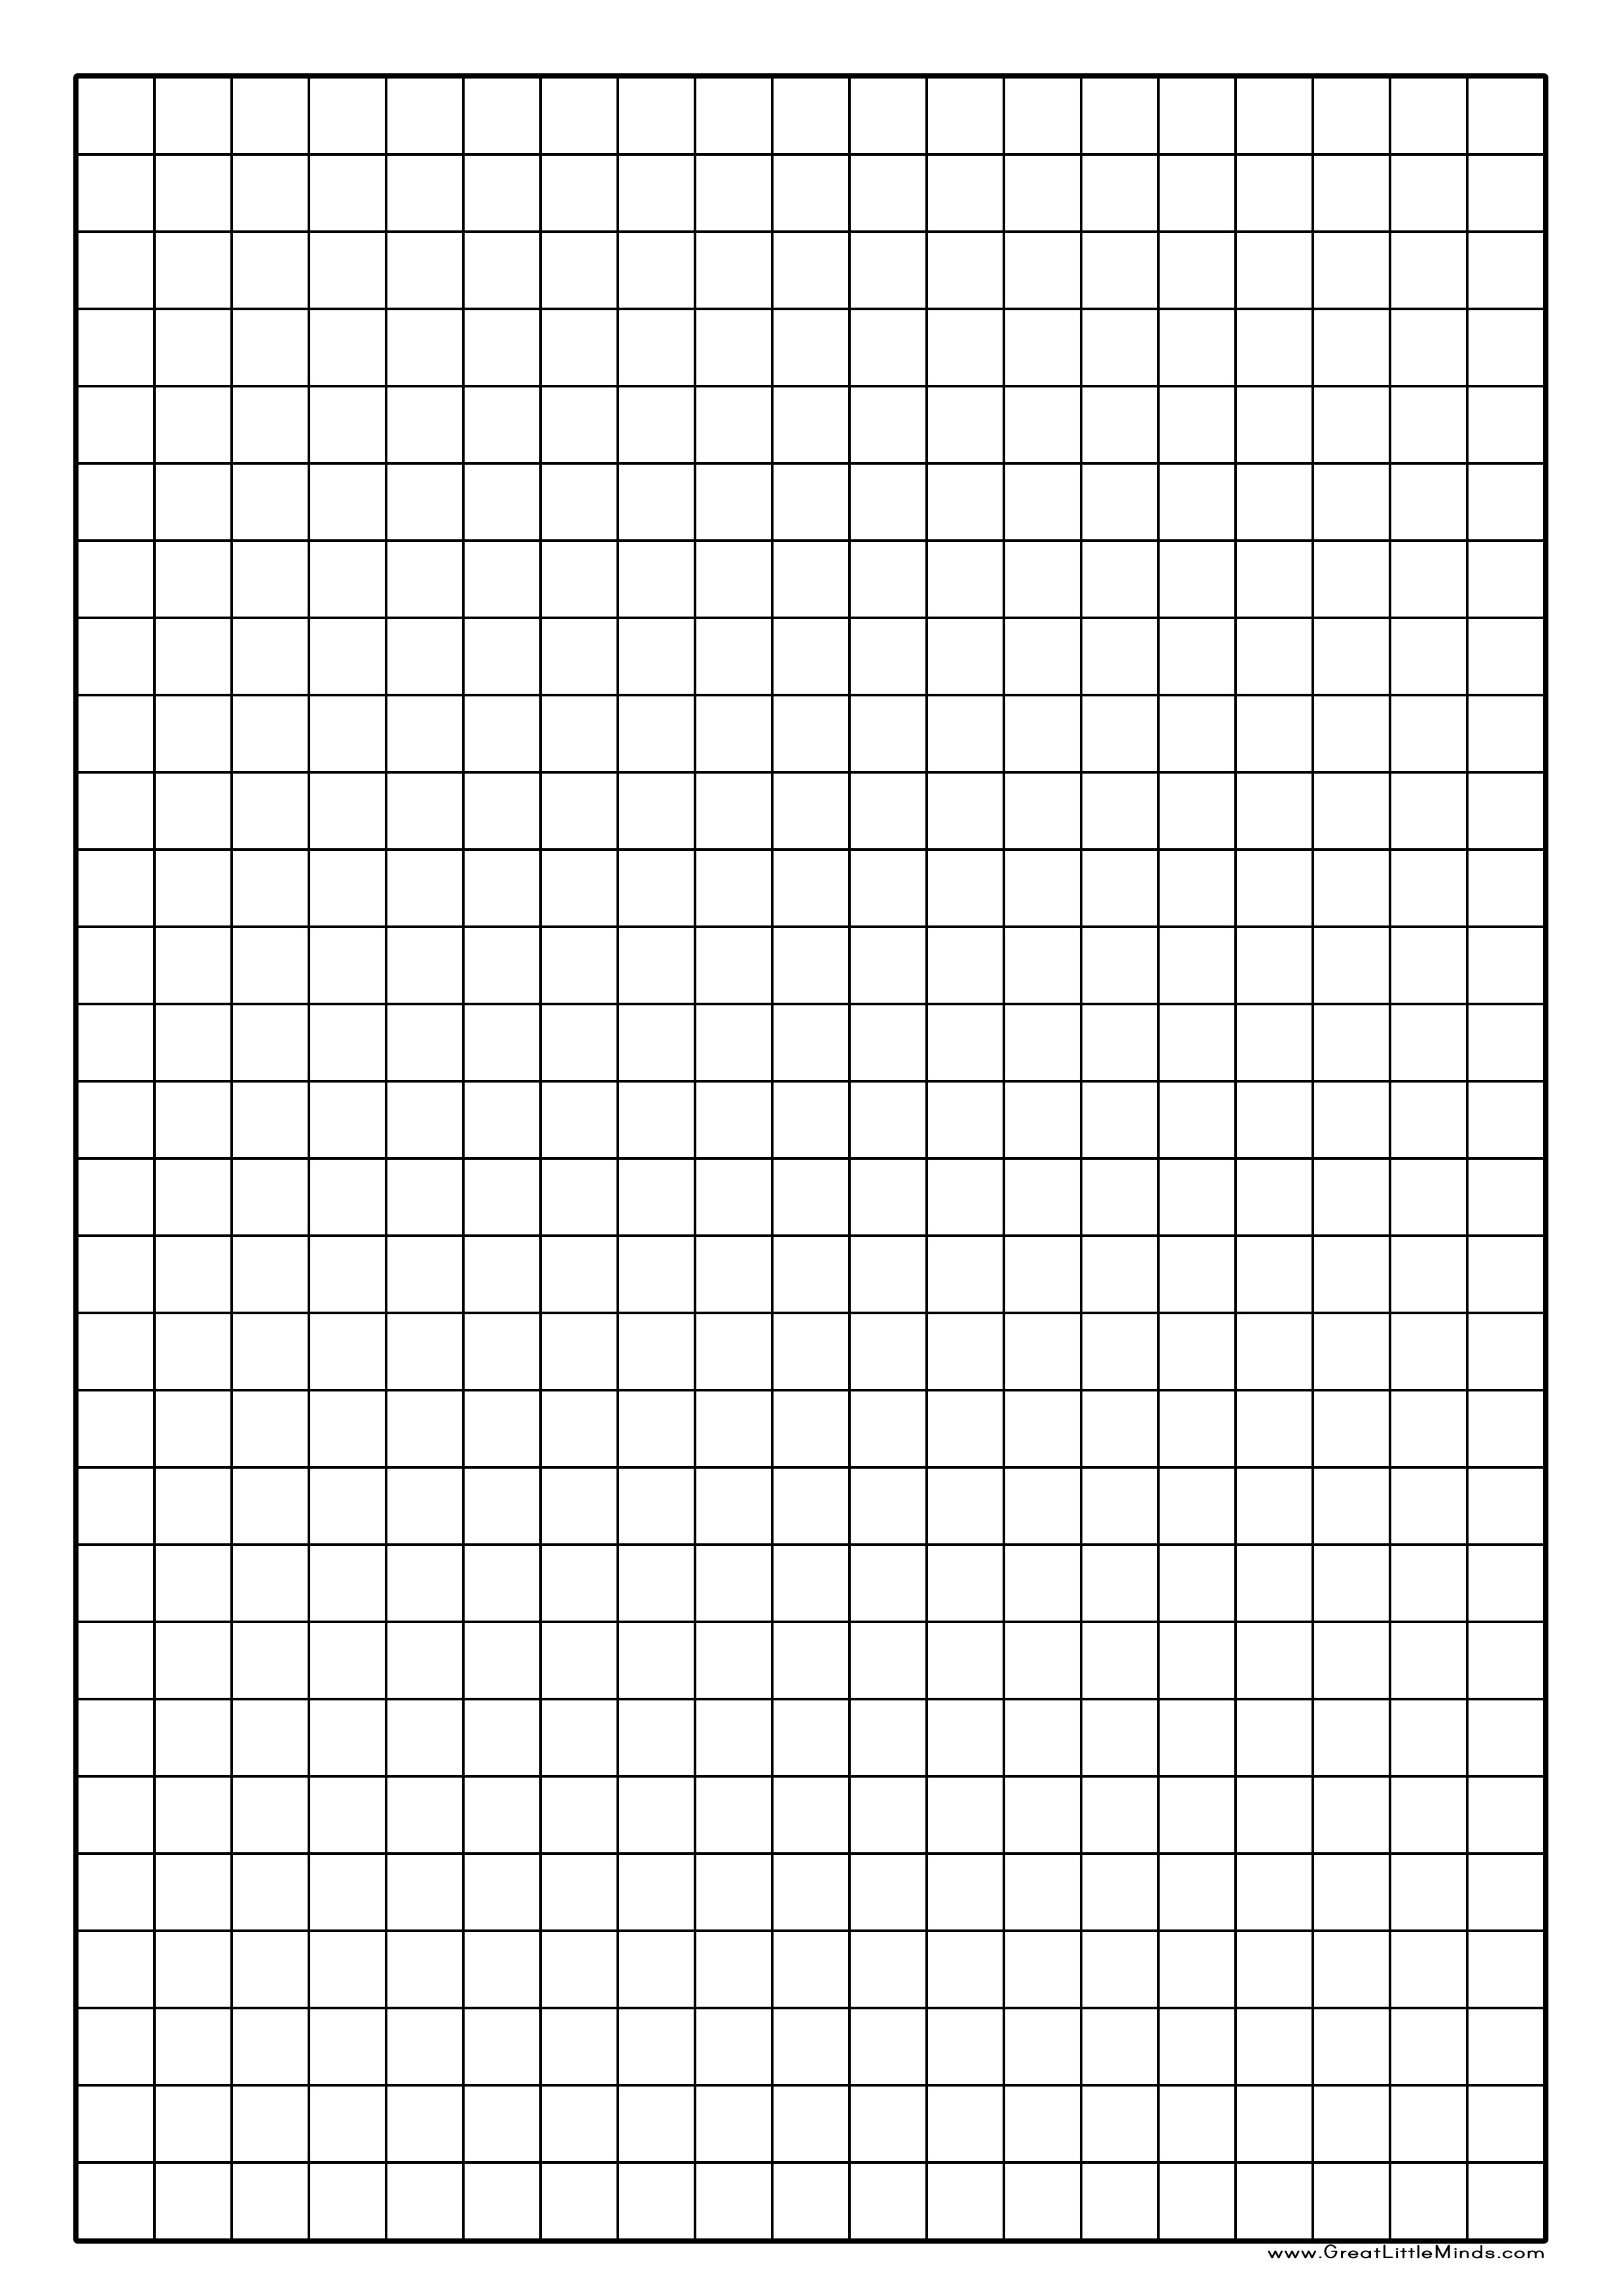 10-best-images-of-coordinate-math-worksheets-printable-5th-grade